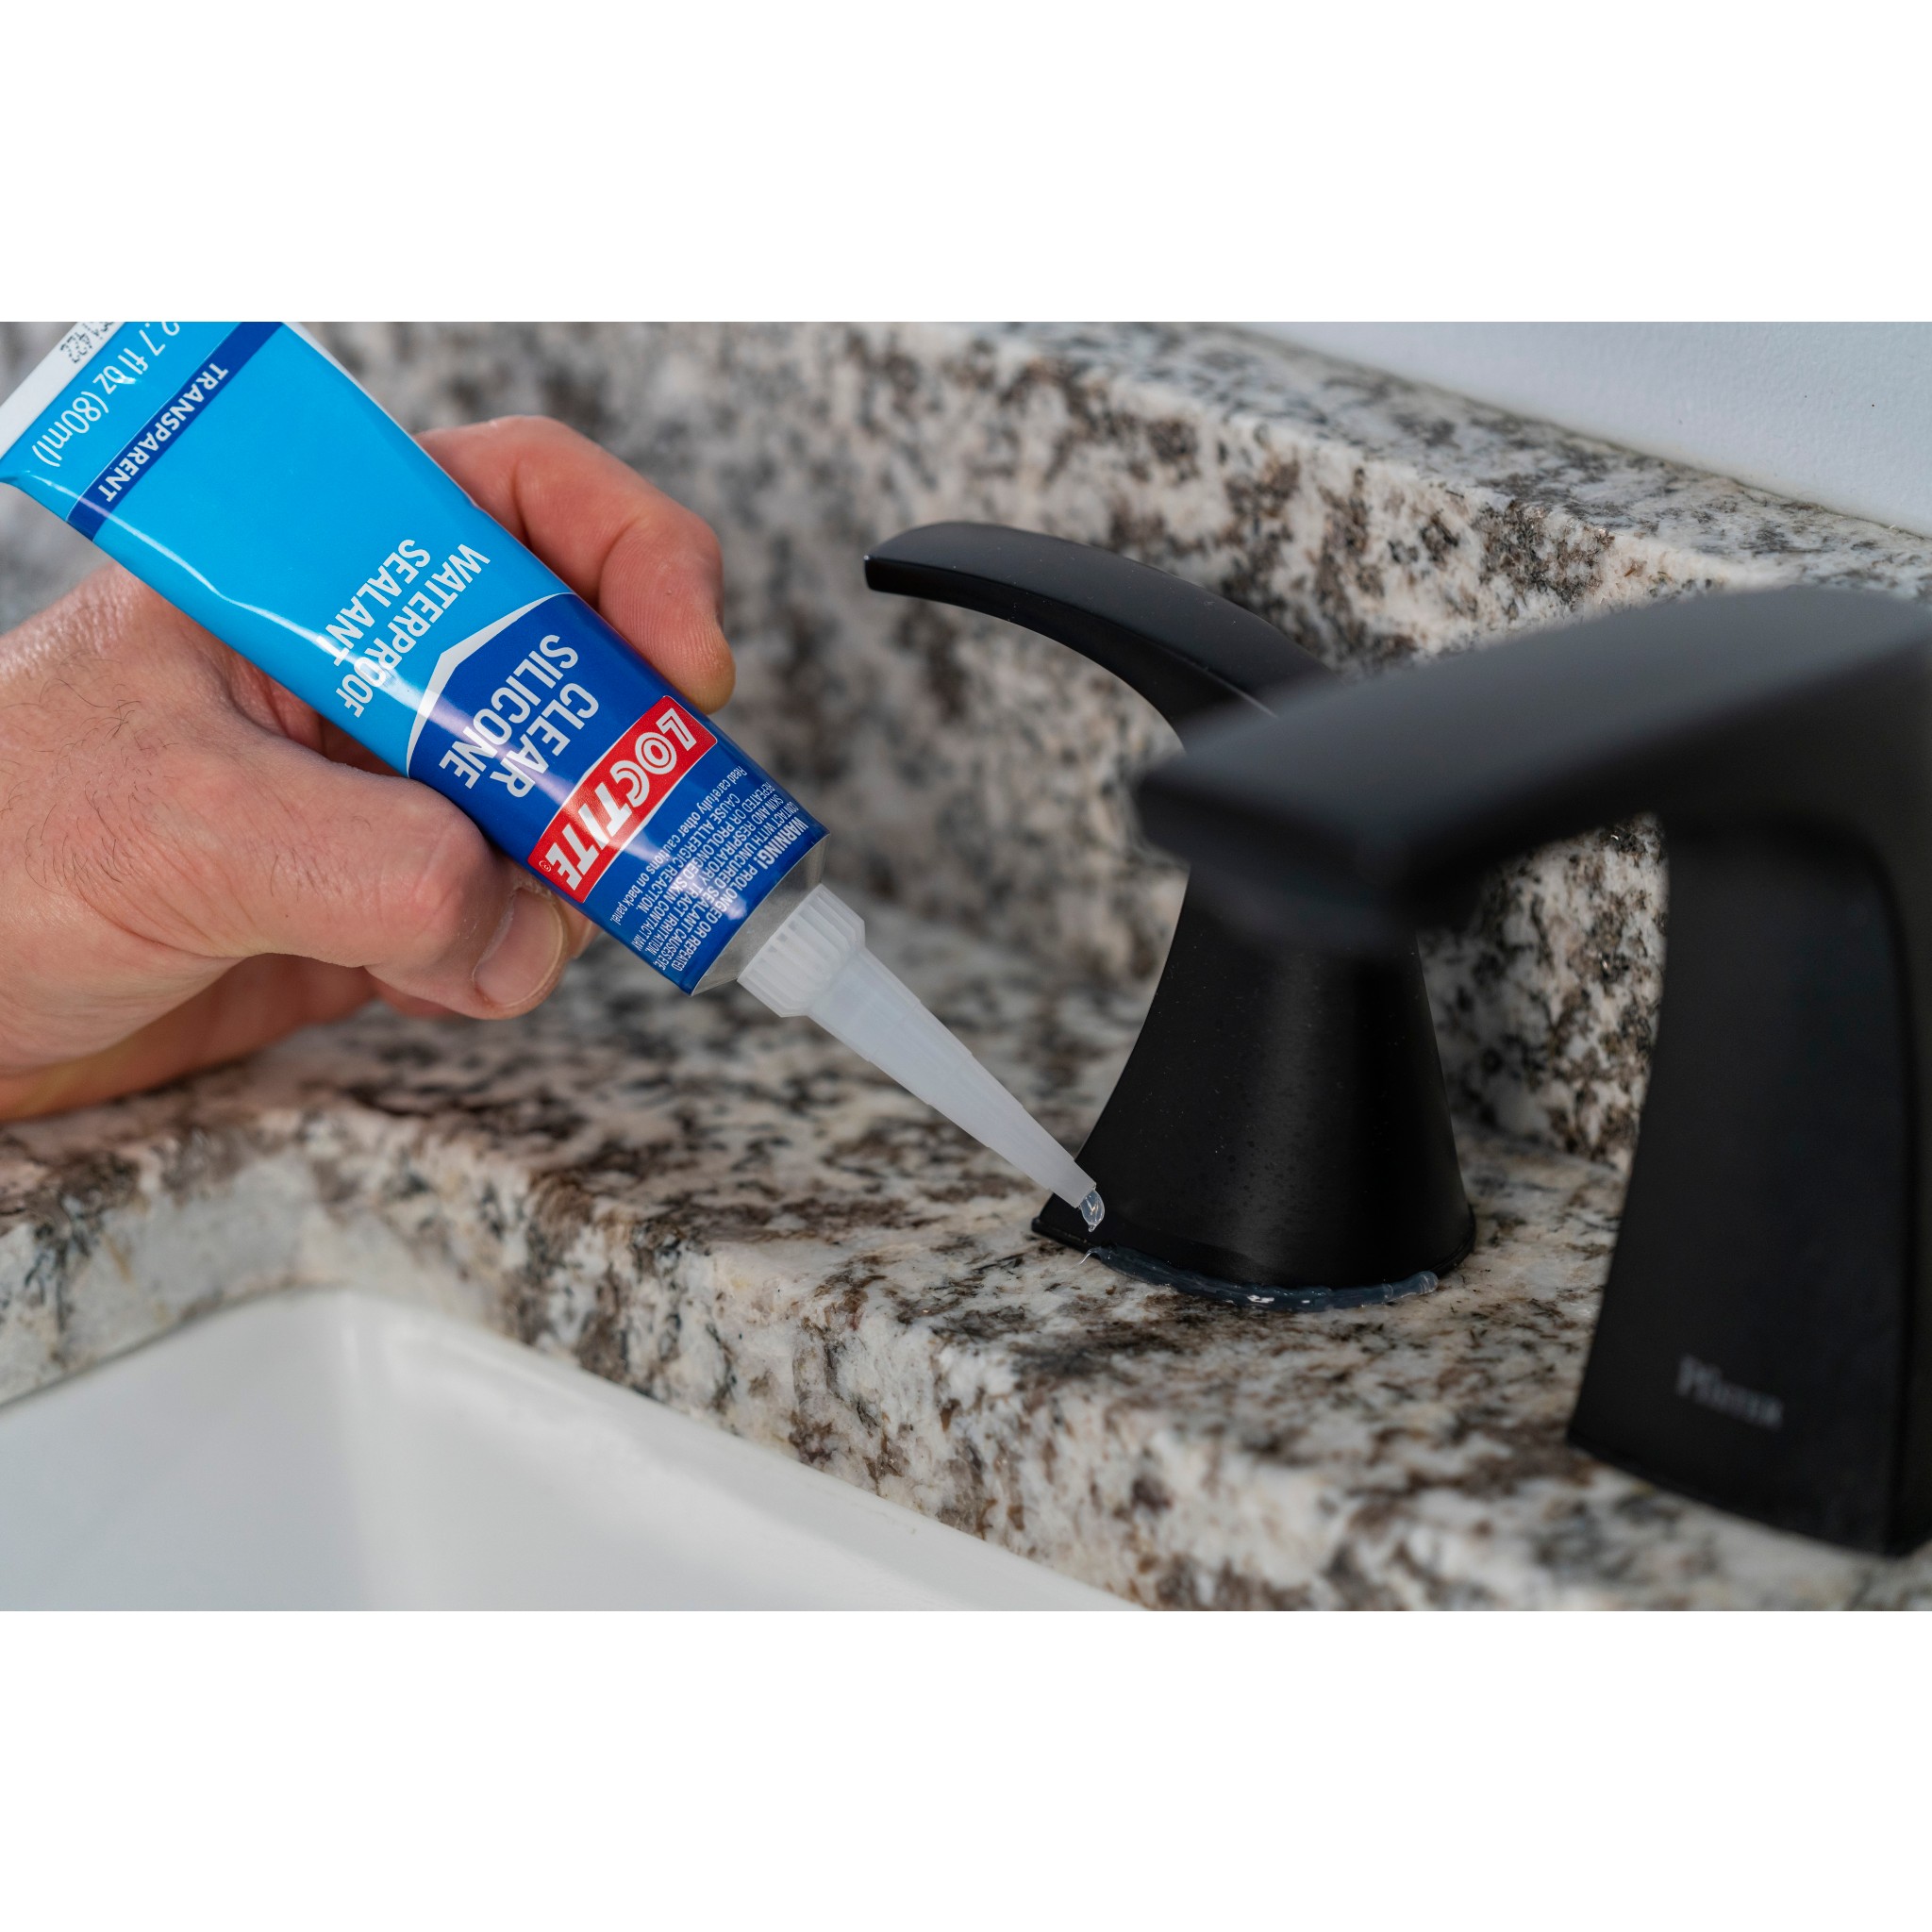 Loctite® Clear Silicone Waterproof Sealant